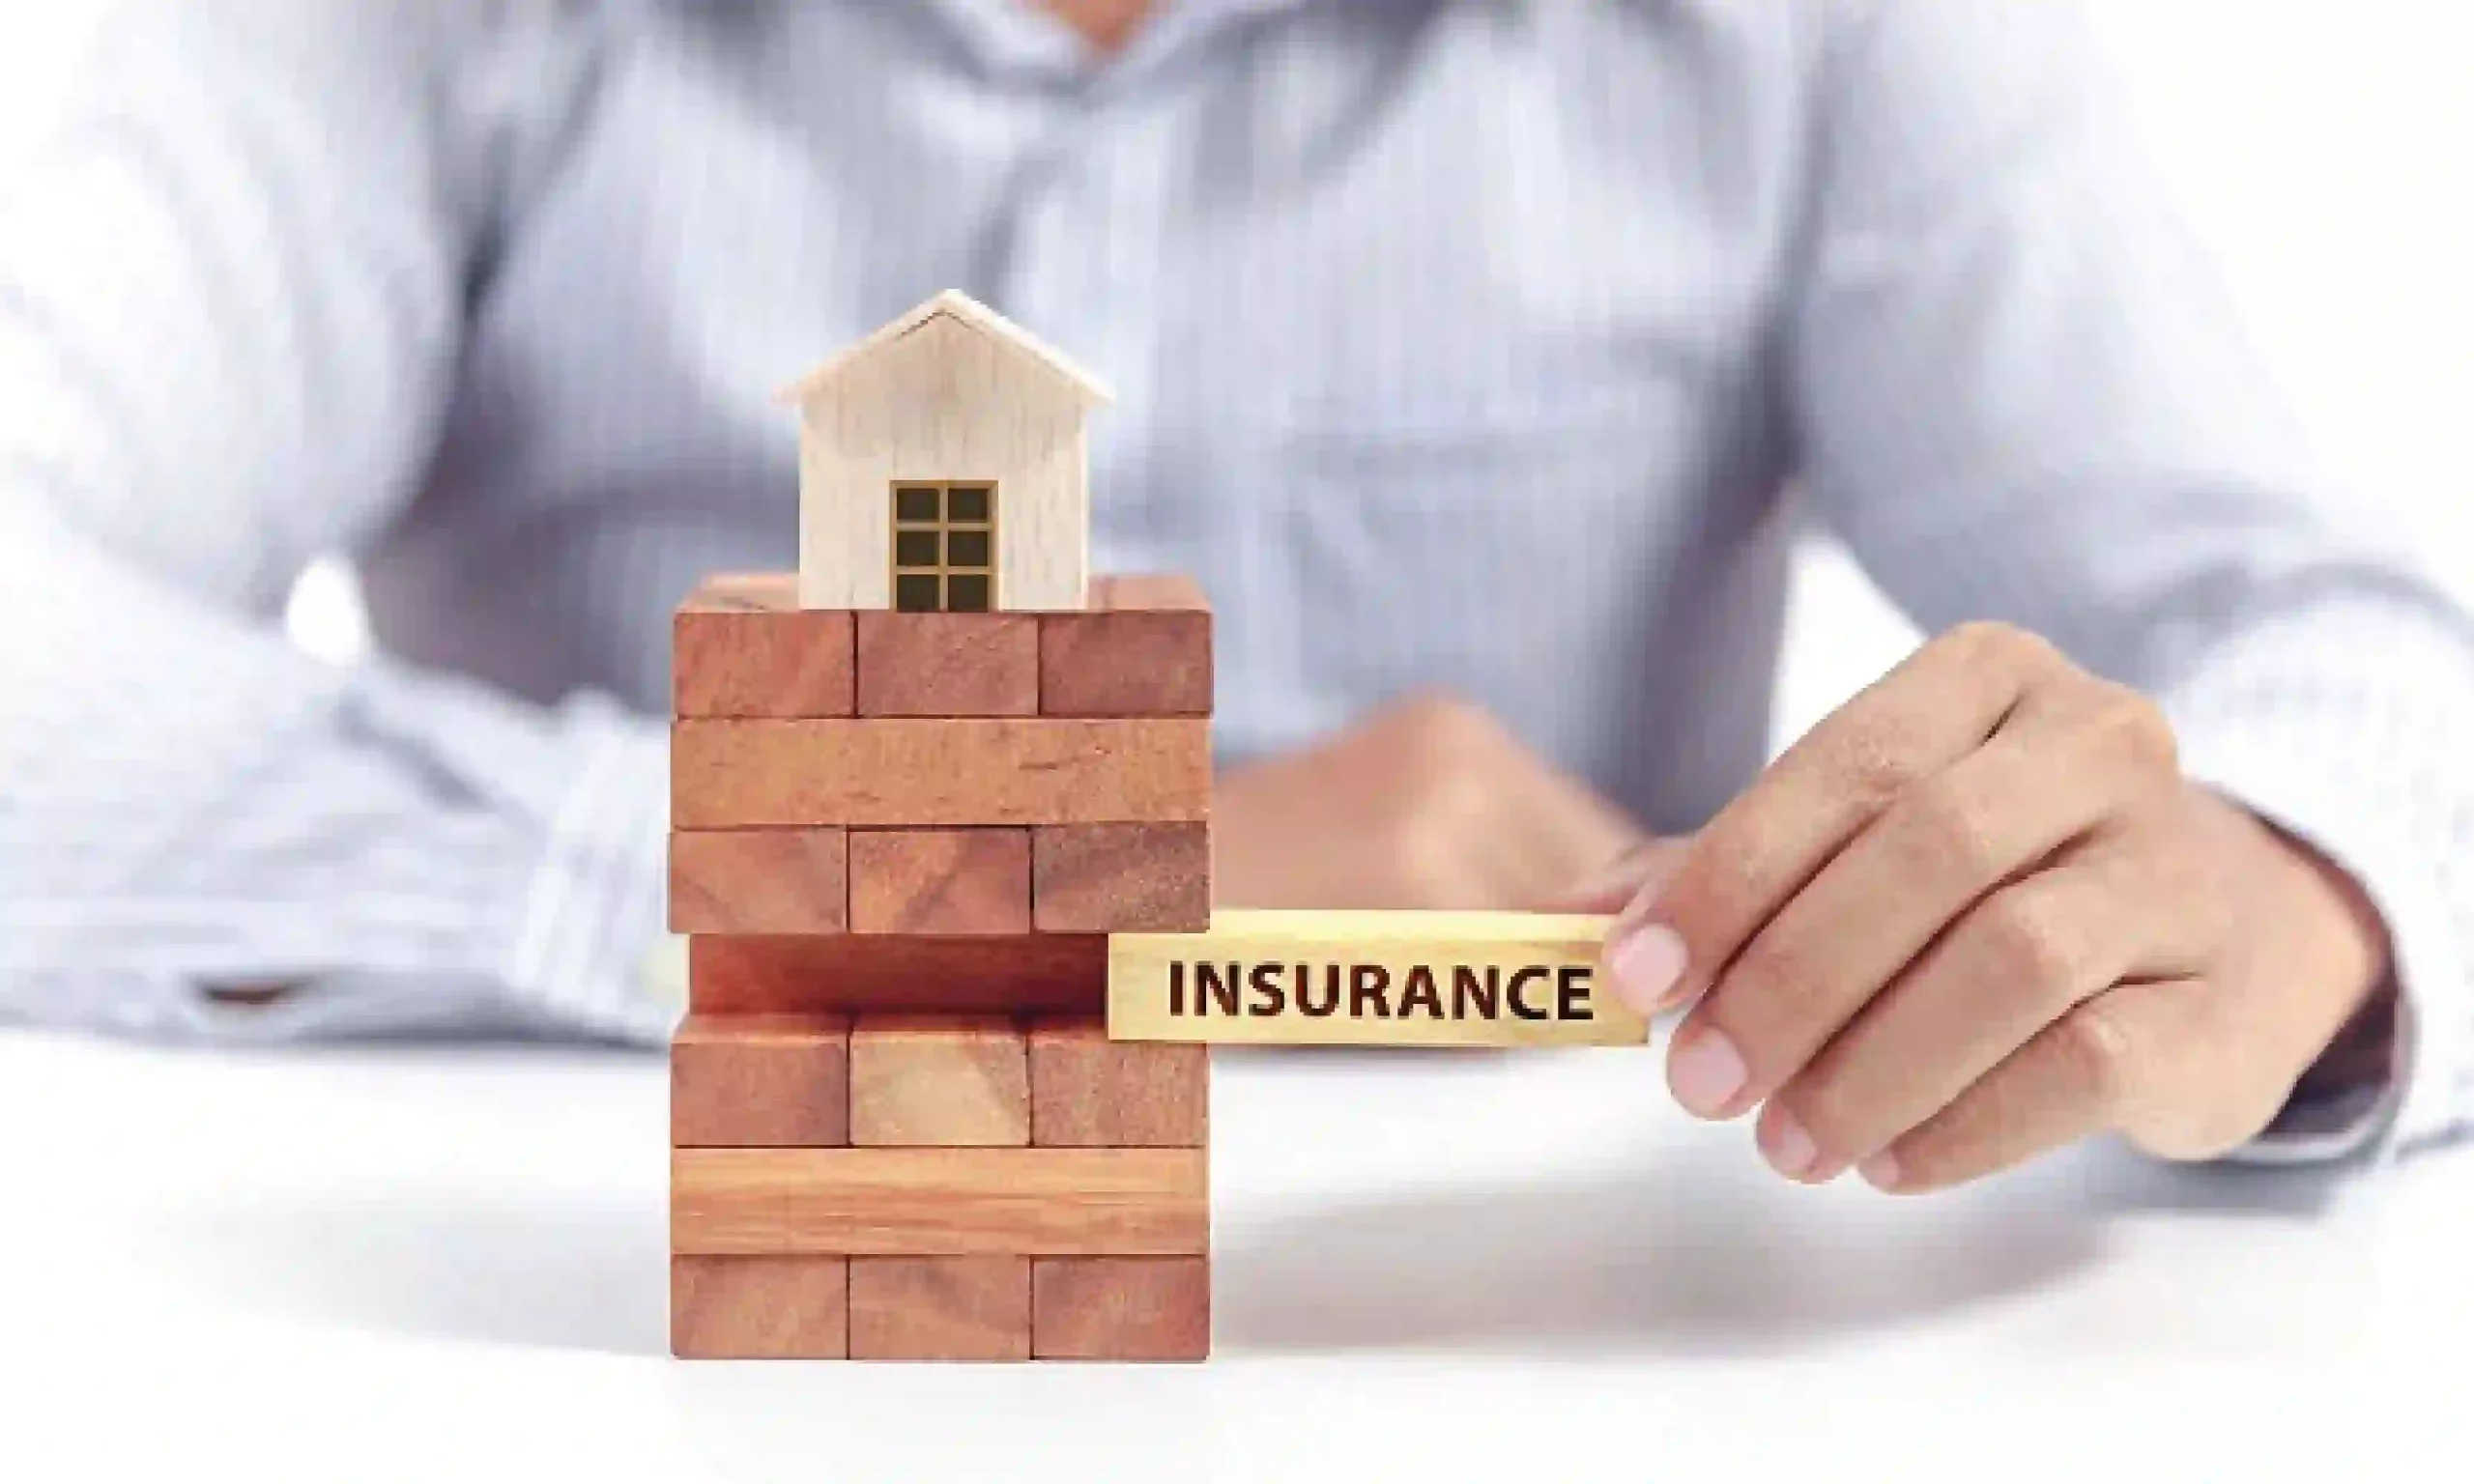 Home Loan Insurance is not mandatory but very important